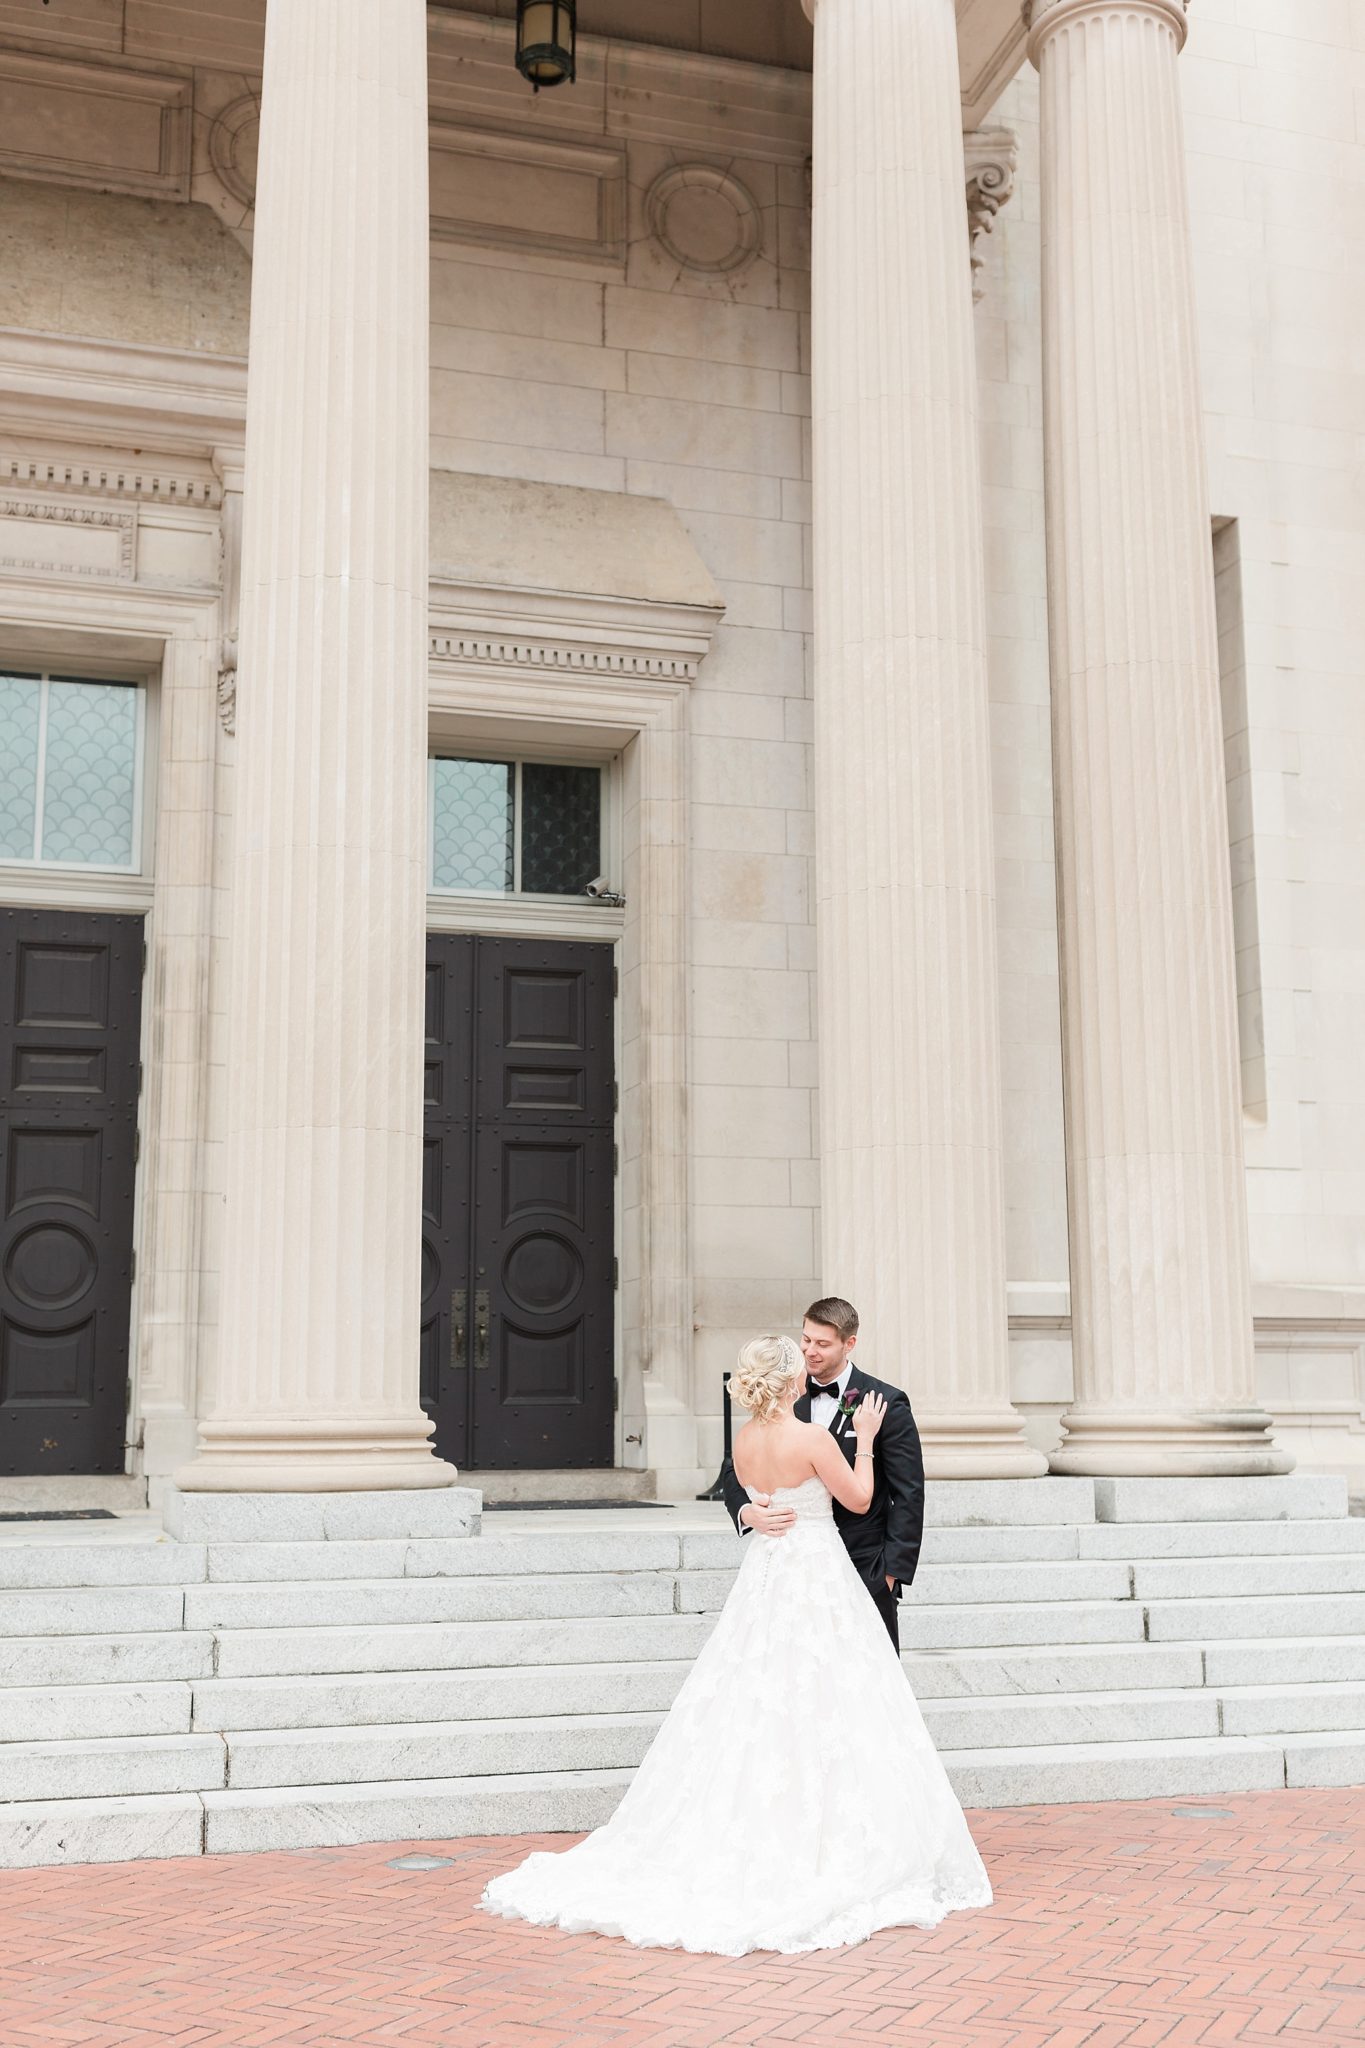 Alicia, a Washington, DC wedding photographer, captures this stunning black-tie wedding at the Cathedral of the Sacred Heart and Omni Hotel in Richmond, VA.